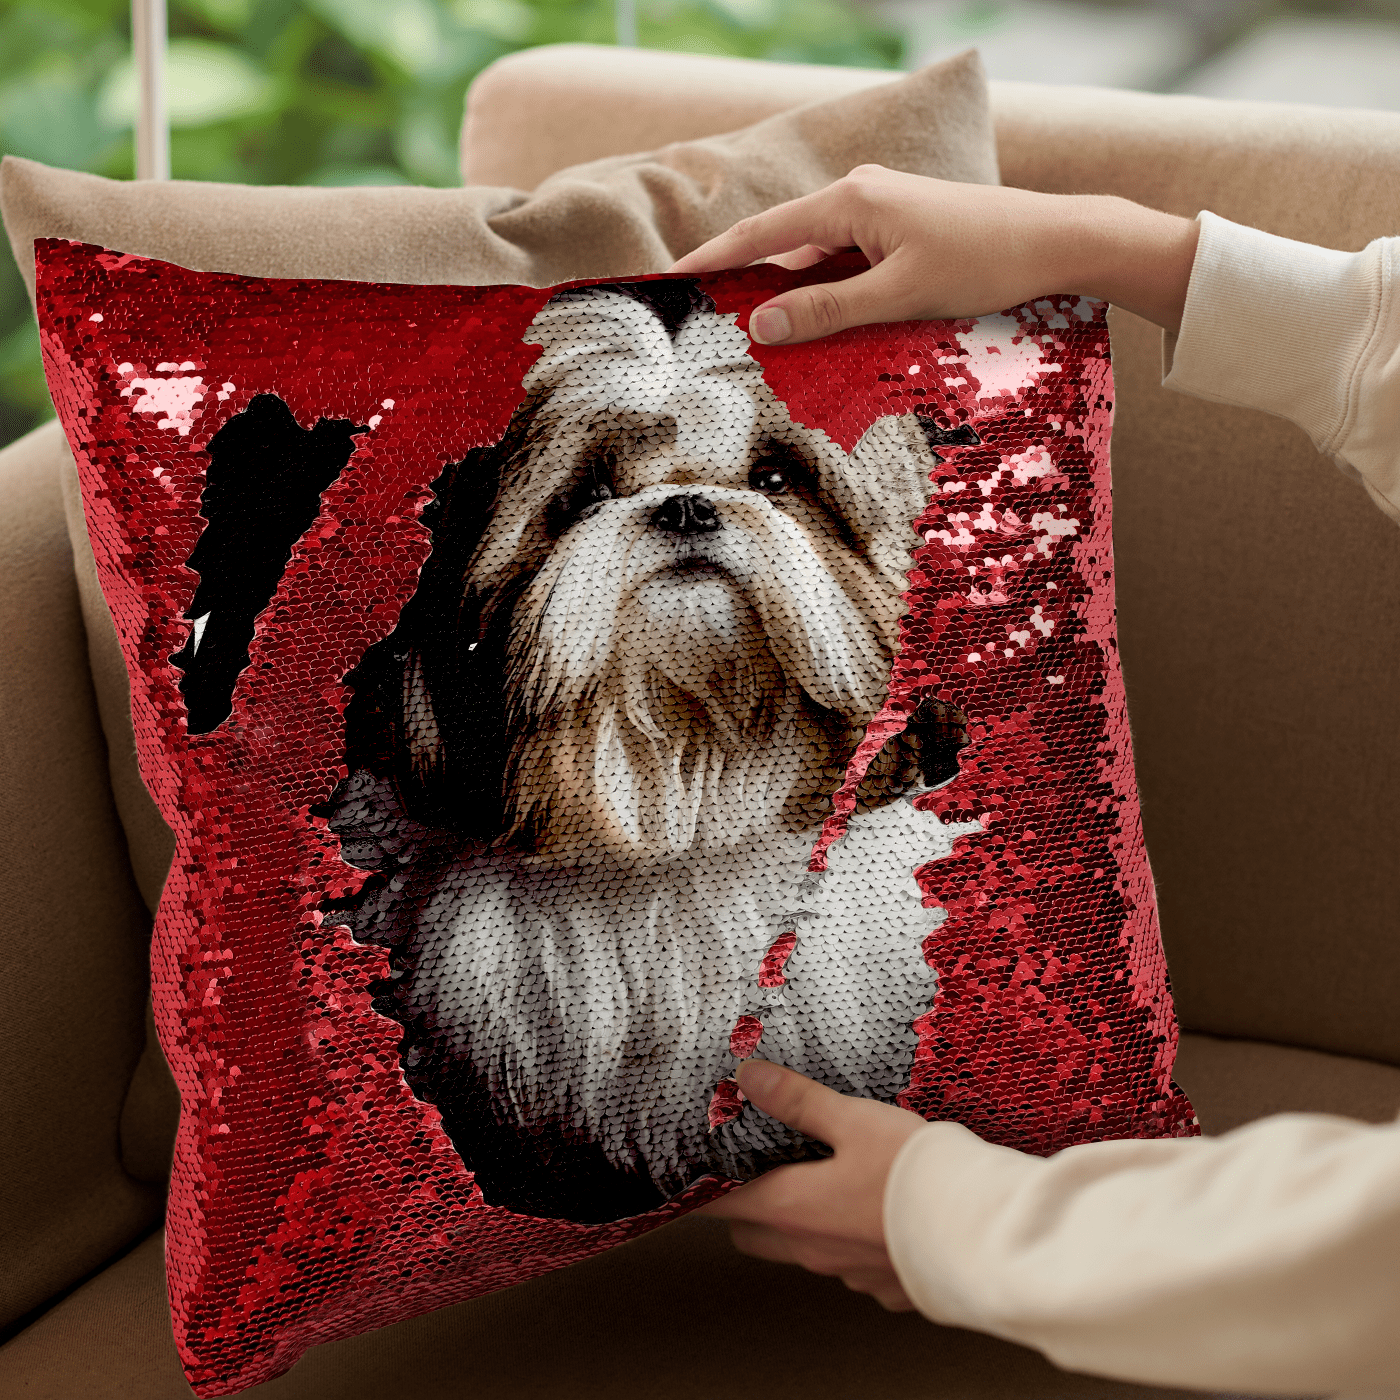 Custom Sequin Throw Pillow With Photo-comfy Satin Cushion Covers,decorative  Pillowcases for Party/christmas/thanksgiving/new Year/gift Ideas 